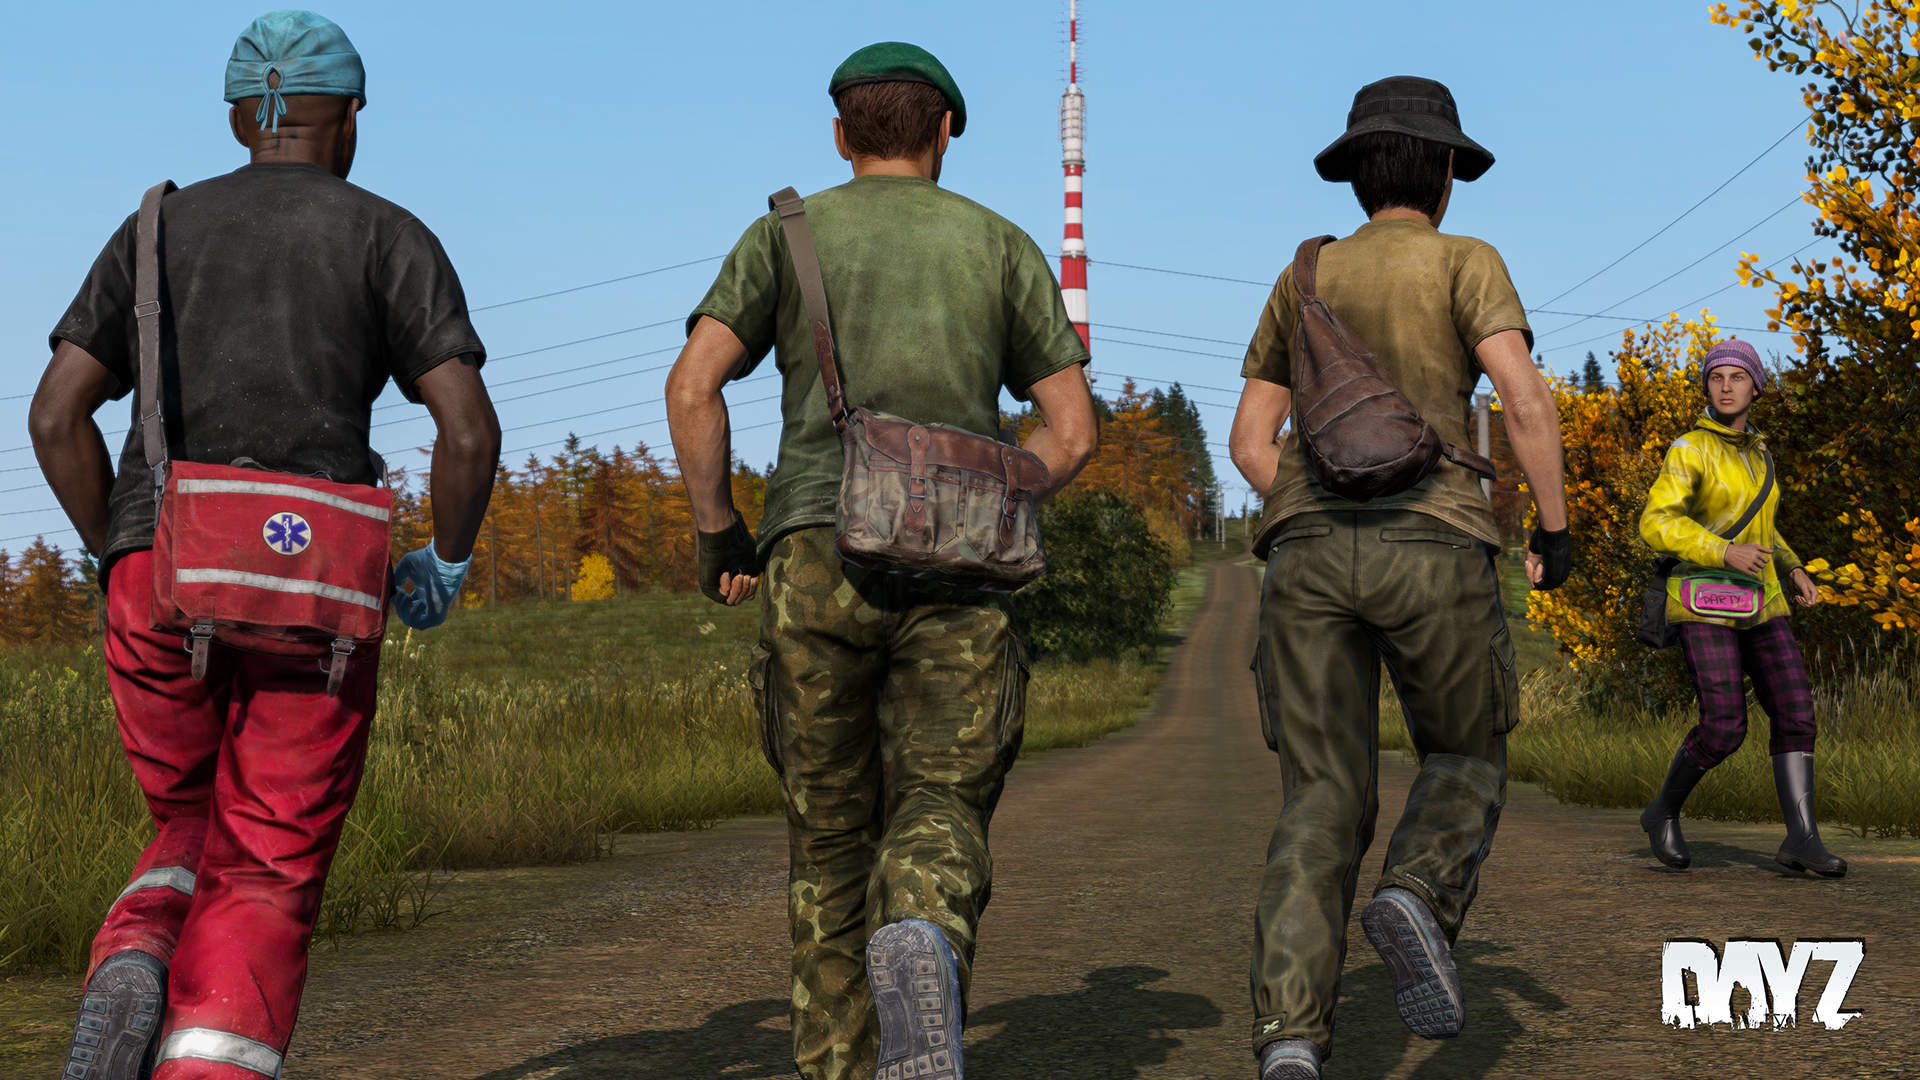 DayZ celebrates 10th anniversary with “savage” spoof of The Day